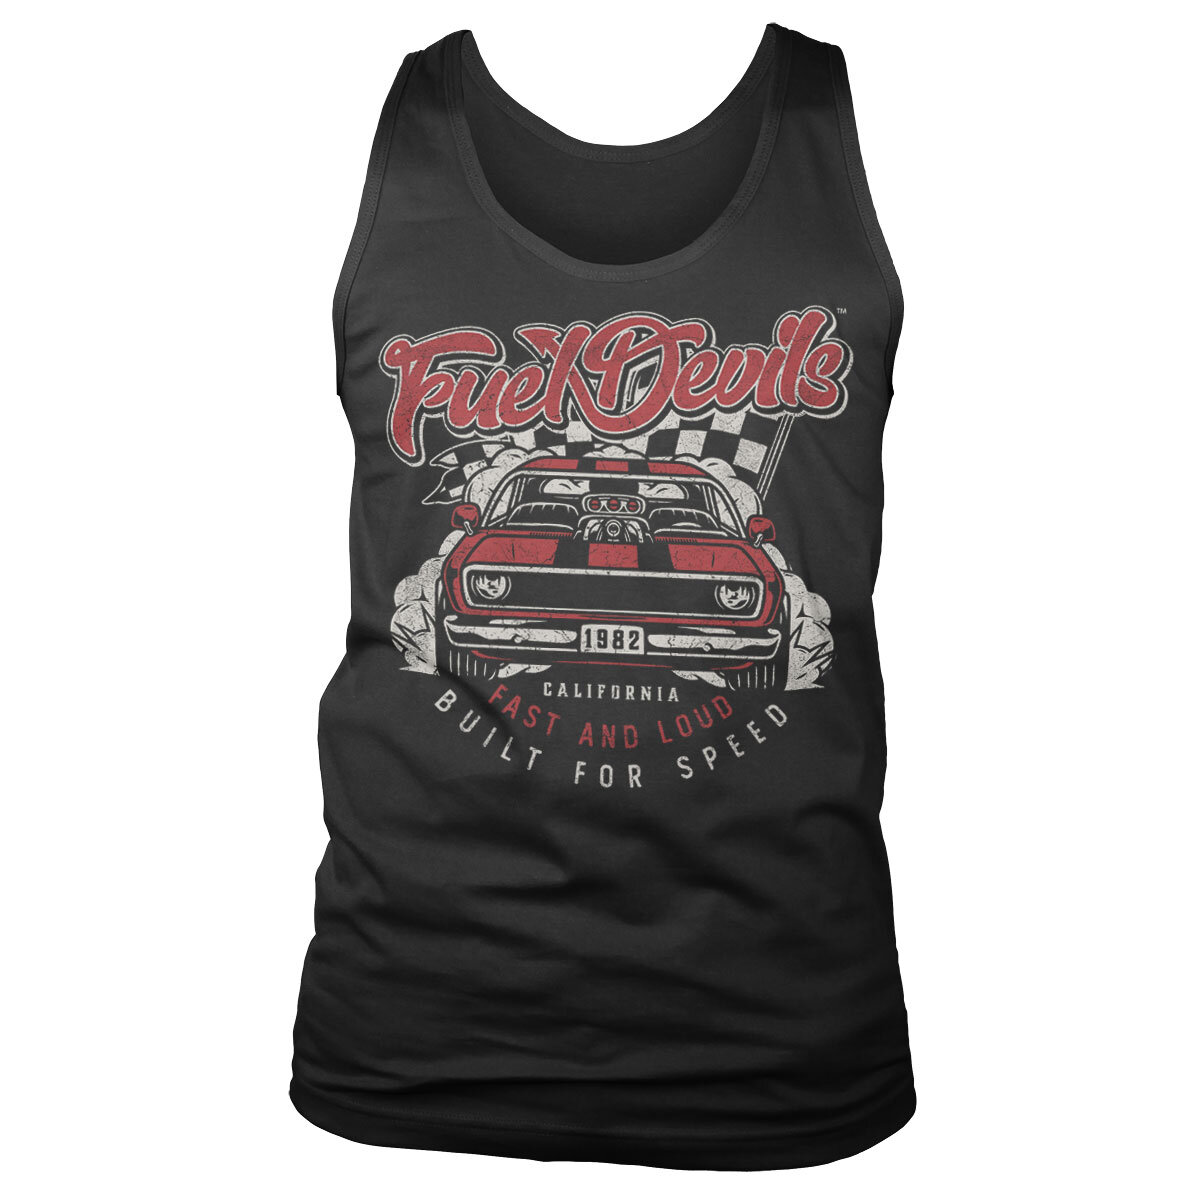 Fuel Devils Fast And Loud Tank Top